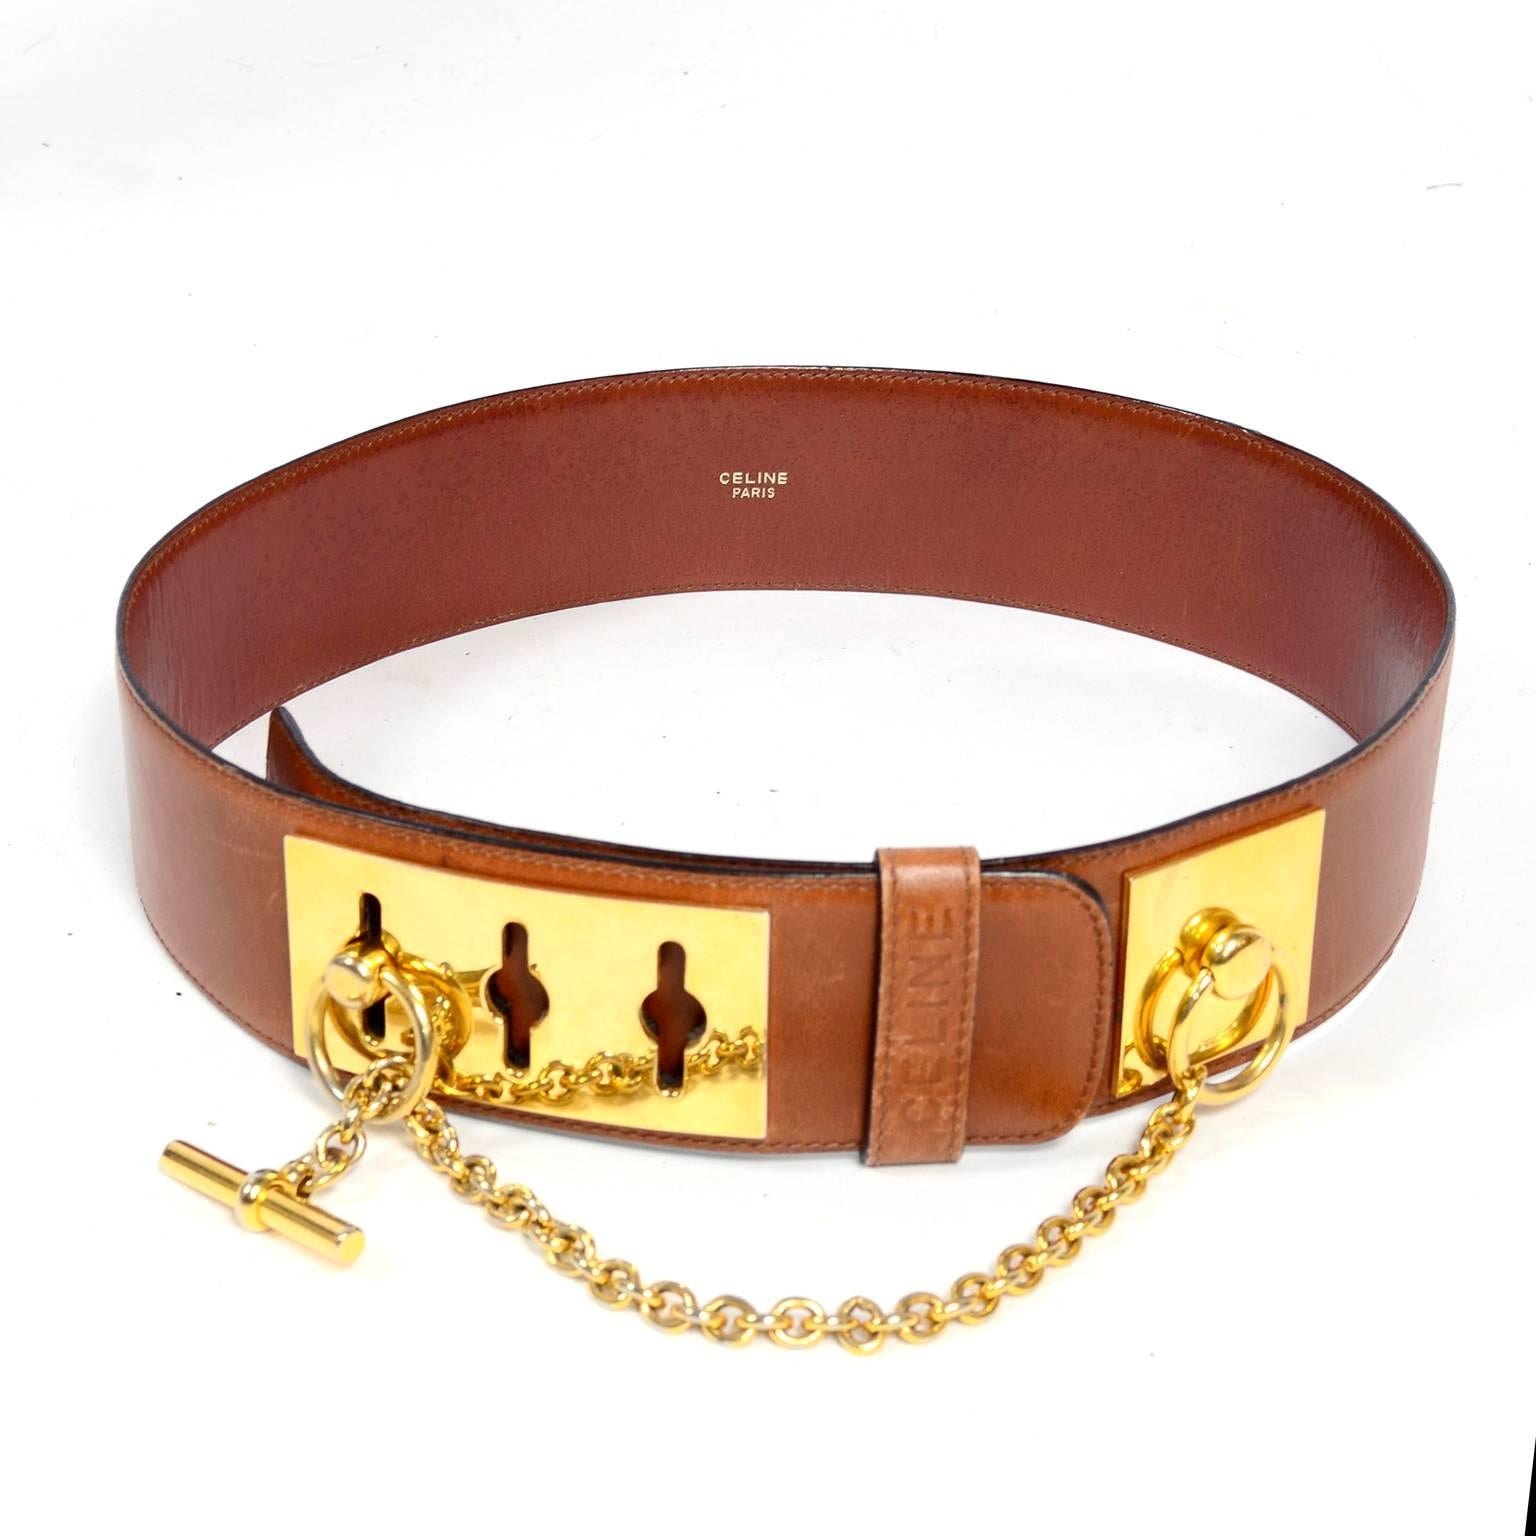 This is a great Celine belt in a pretty medium brown leather with gold tone hardware. This gorgeous waist belt is really incredible in person and both the metal loop bracket and leather are marked Celine. We estimate this belt to fit a size 8/10 and